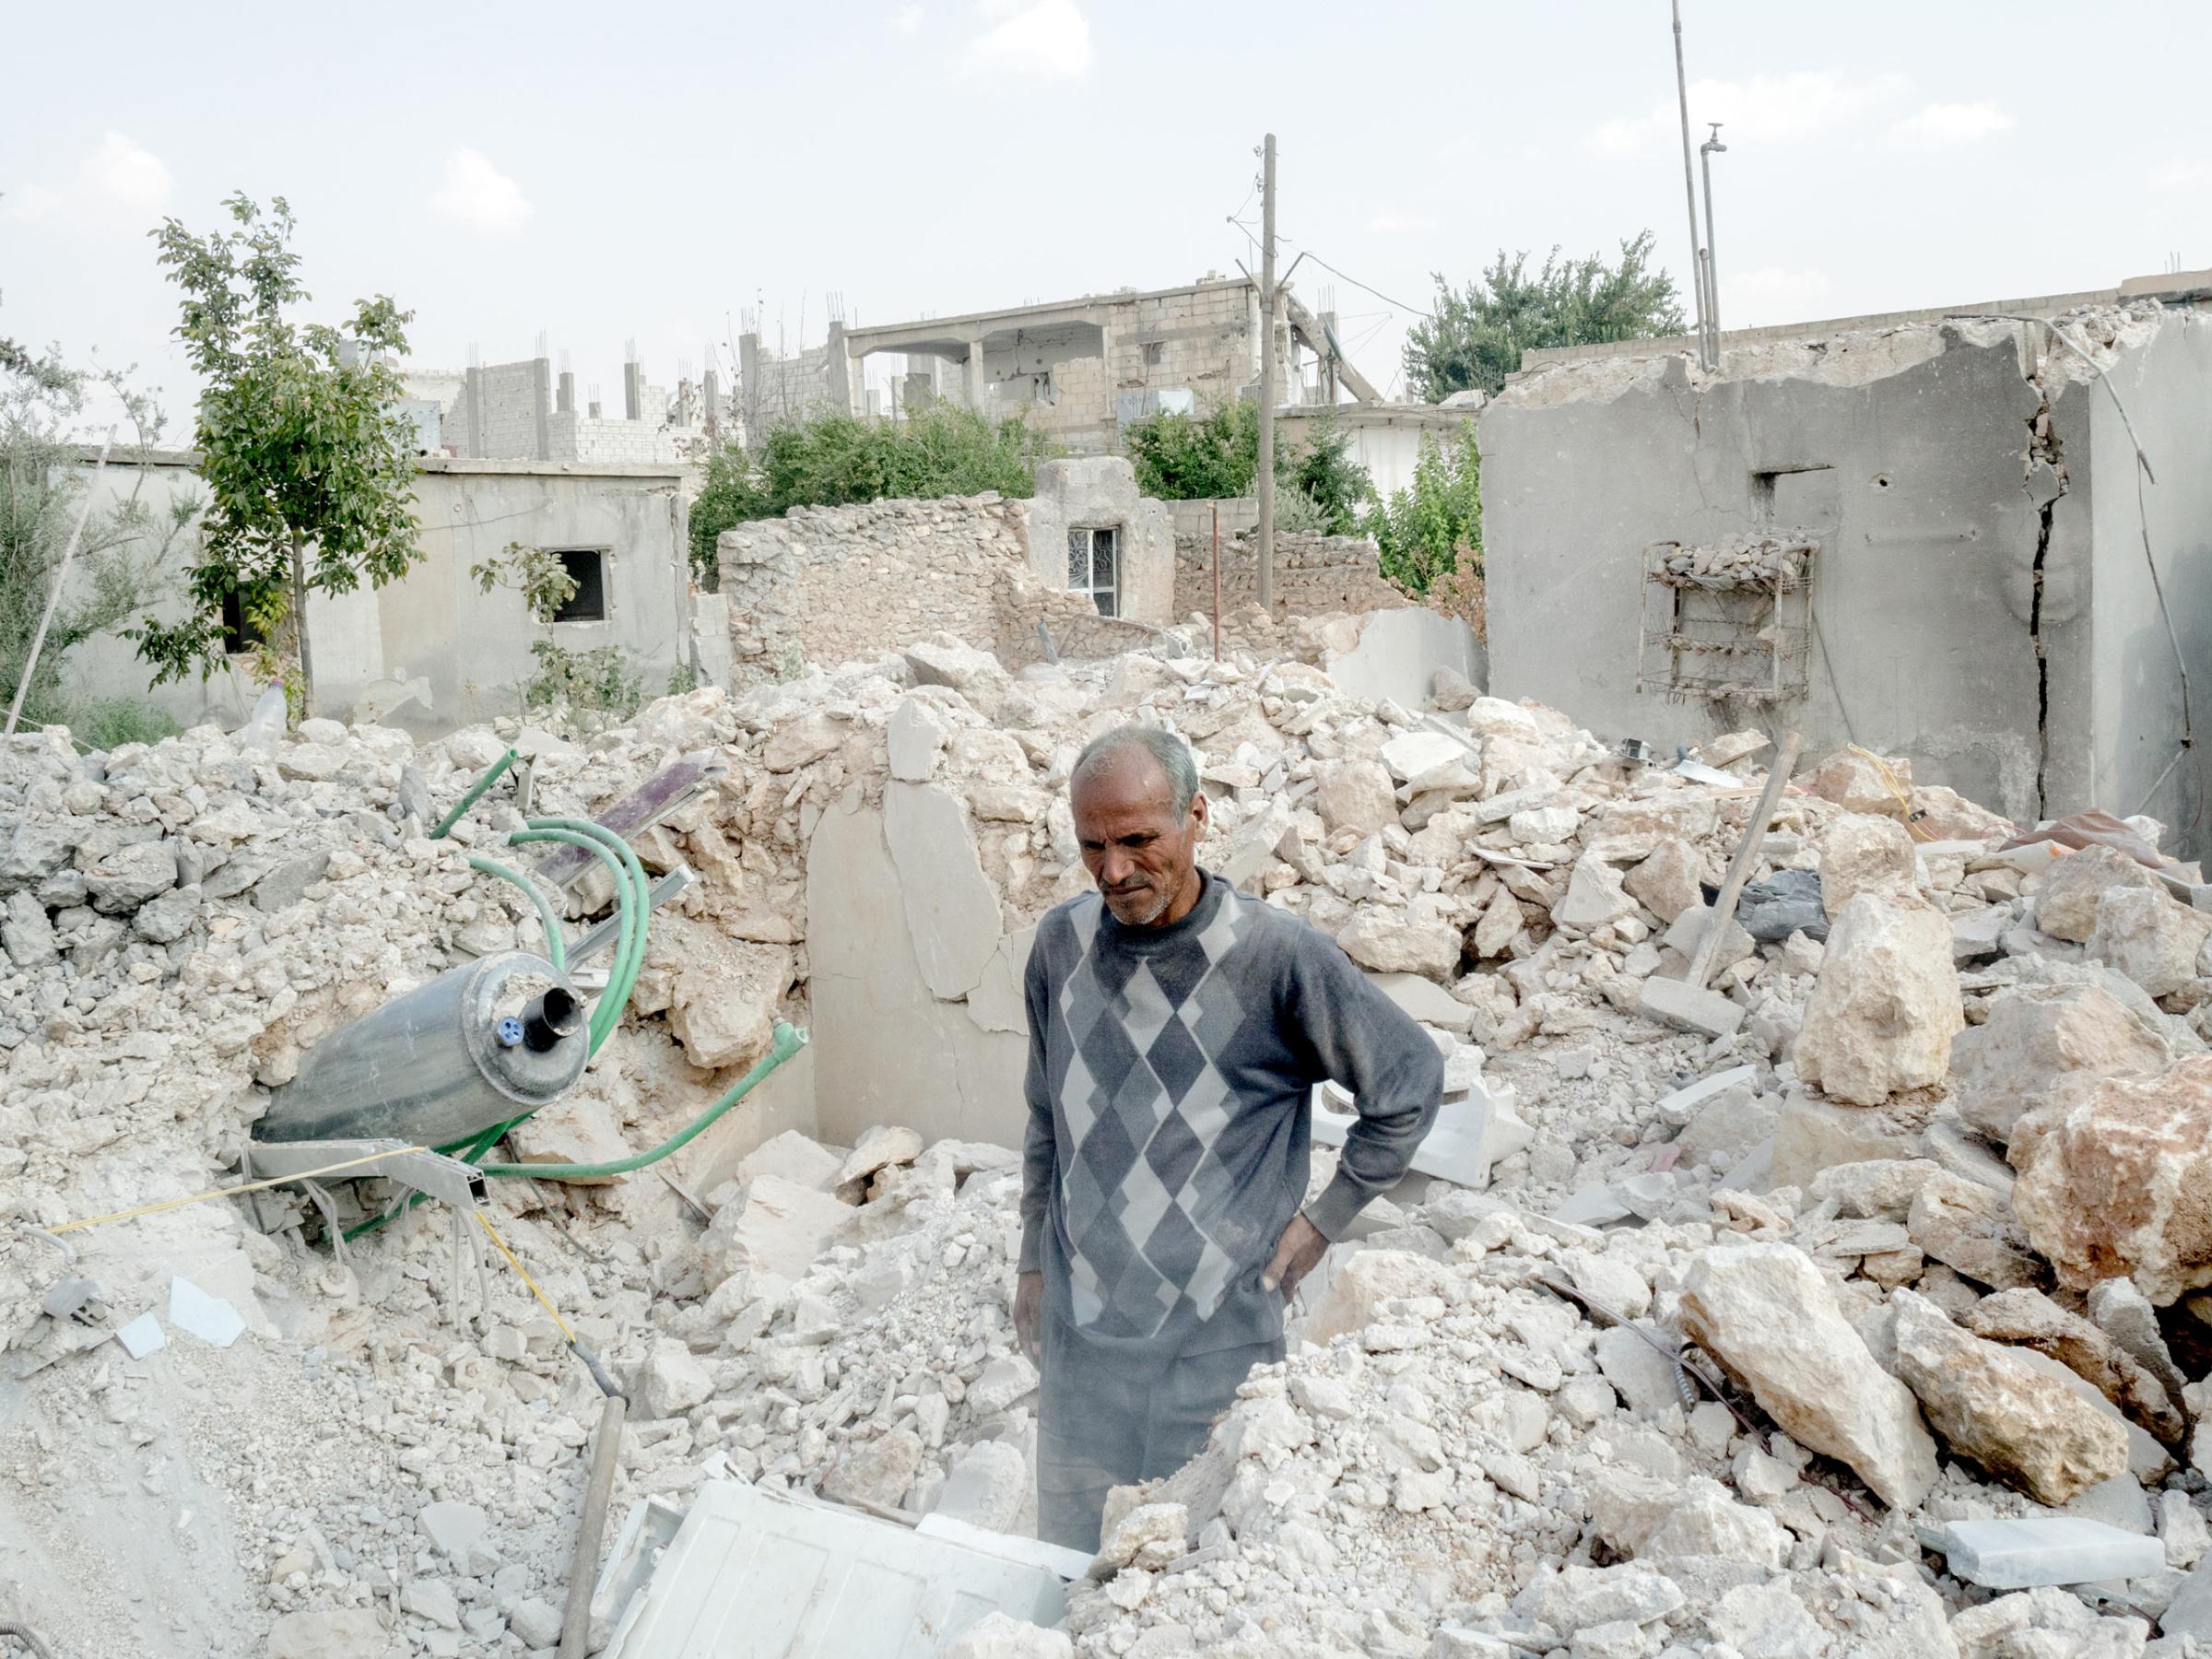 SYRIA. Kobani / Kobane (Arabic: Ayn al Arab) . 07 August 2015. A man is seen trying to recover objects between the rubble of his home.